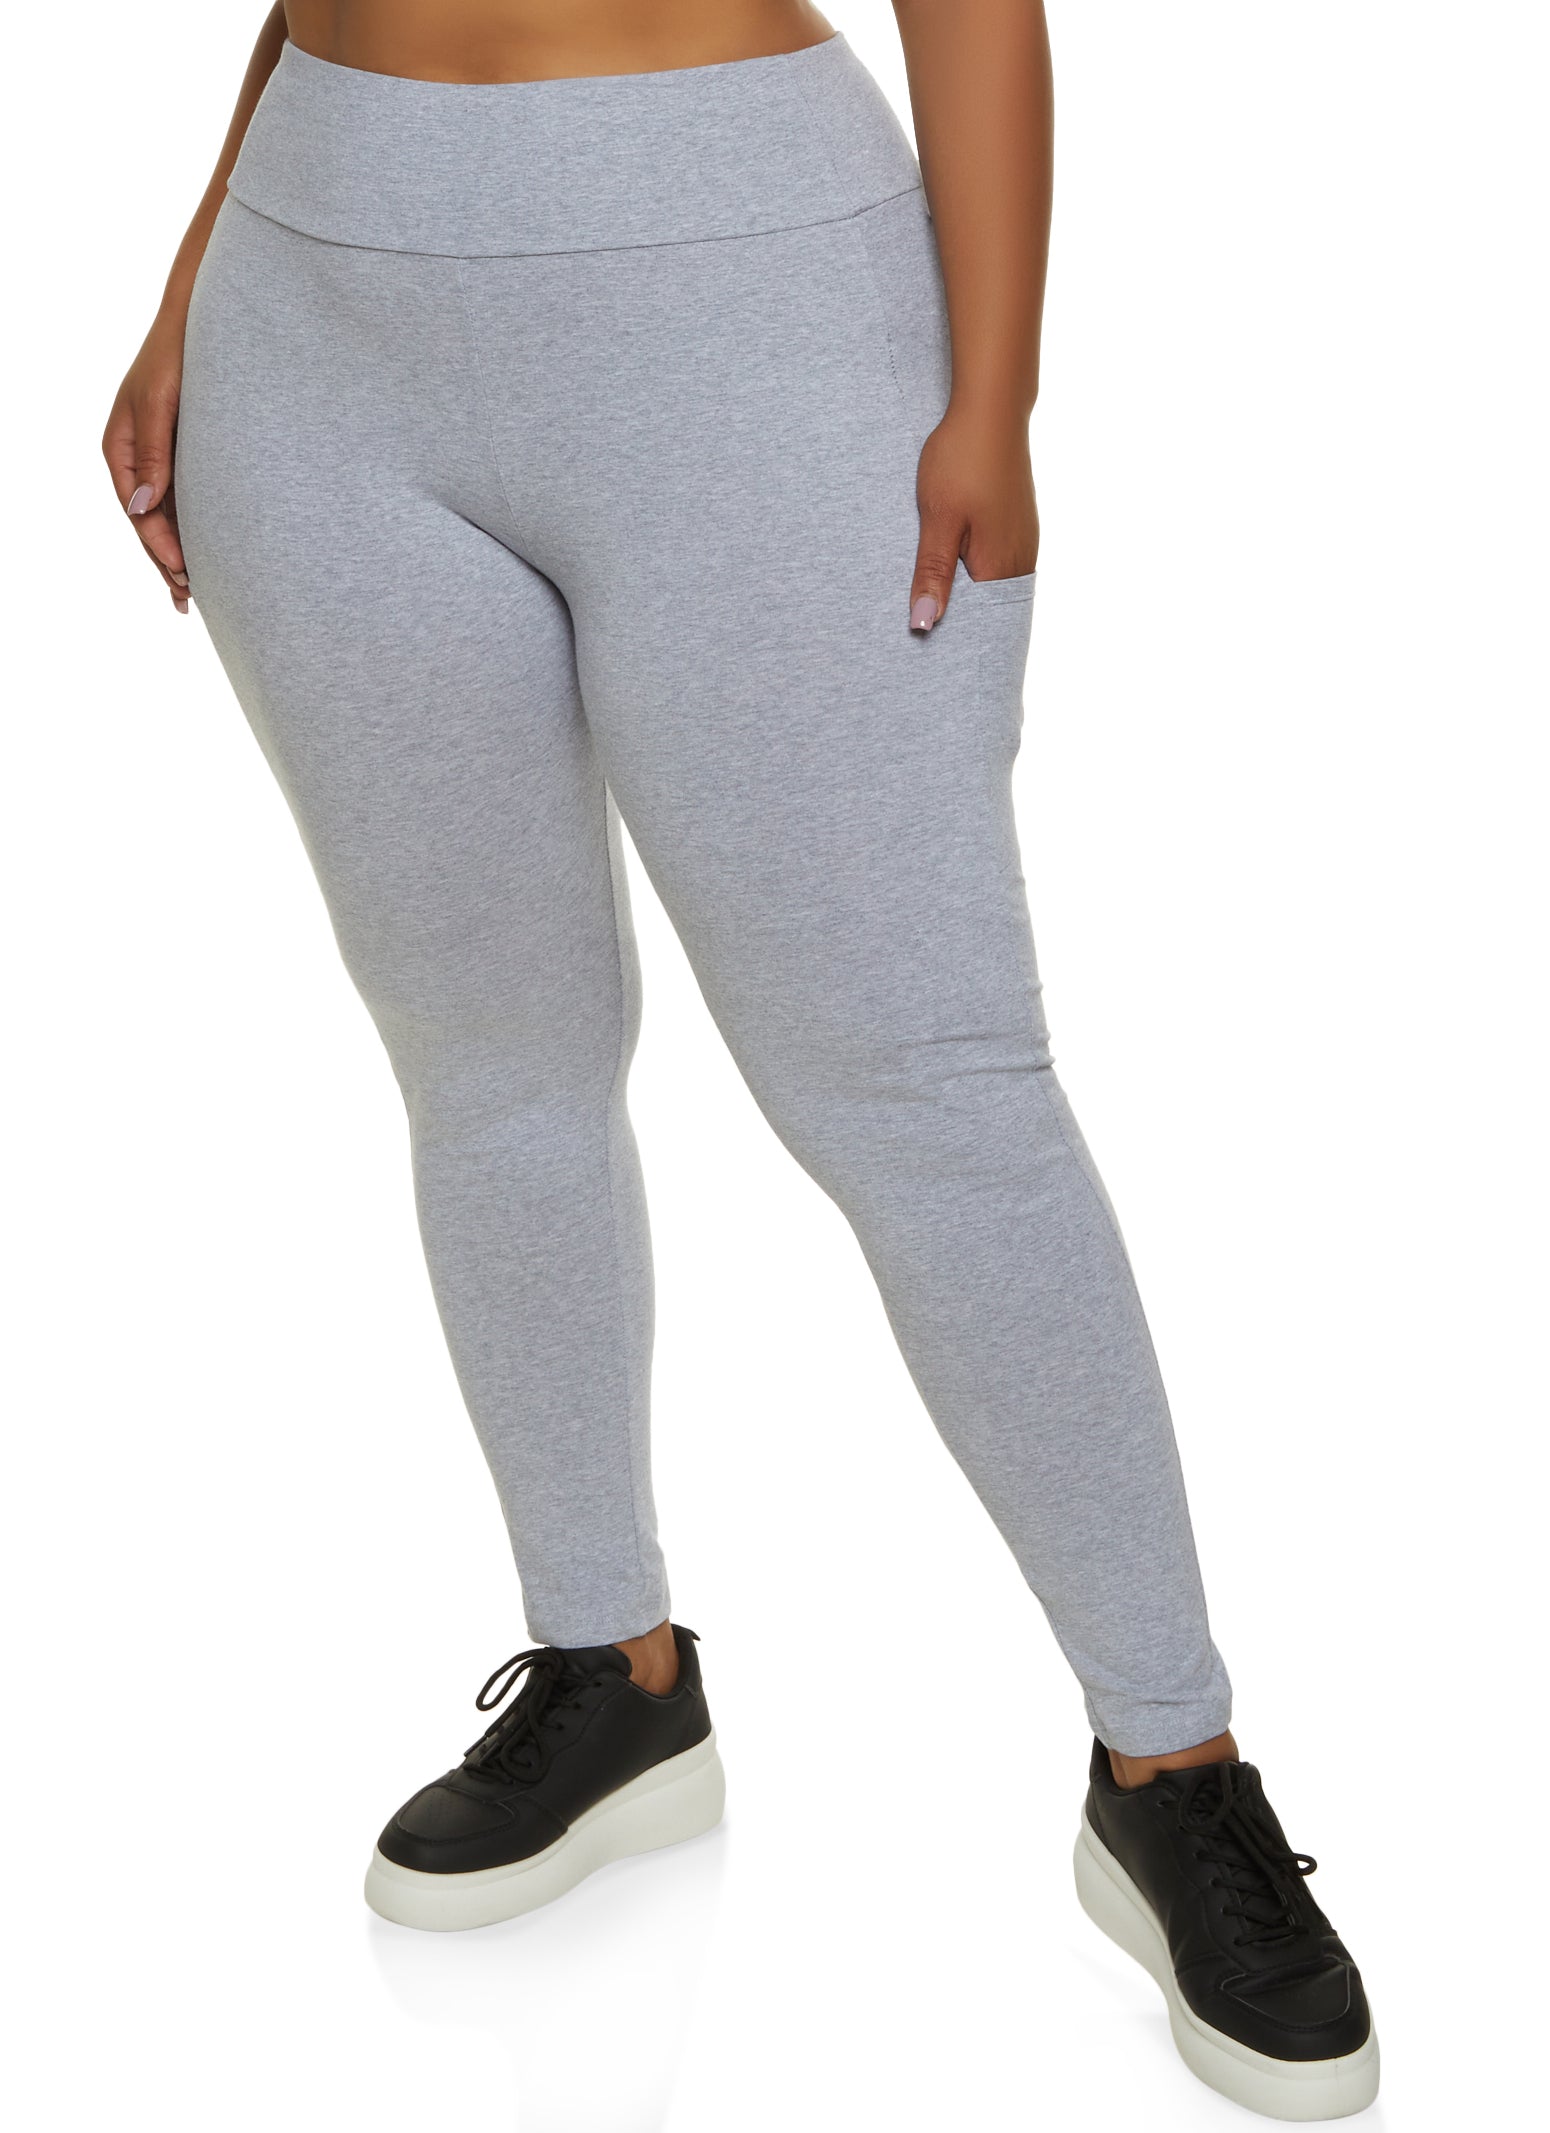 Plus Size Solid High Waist Cell Phone Pocket Leggings - Heather